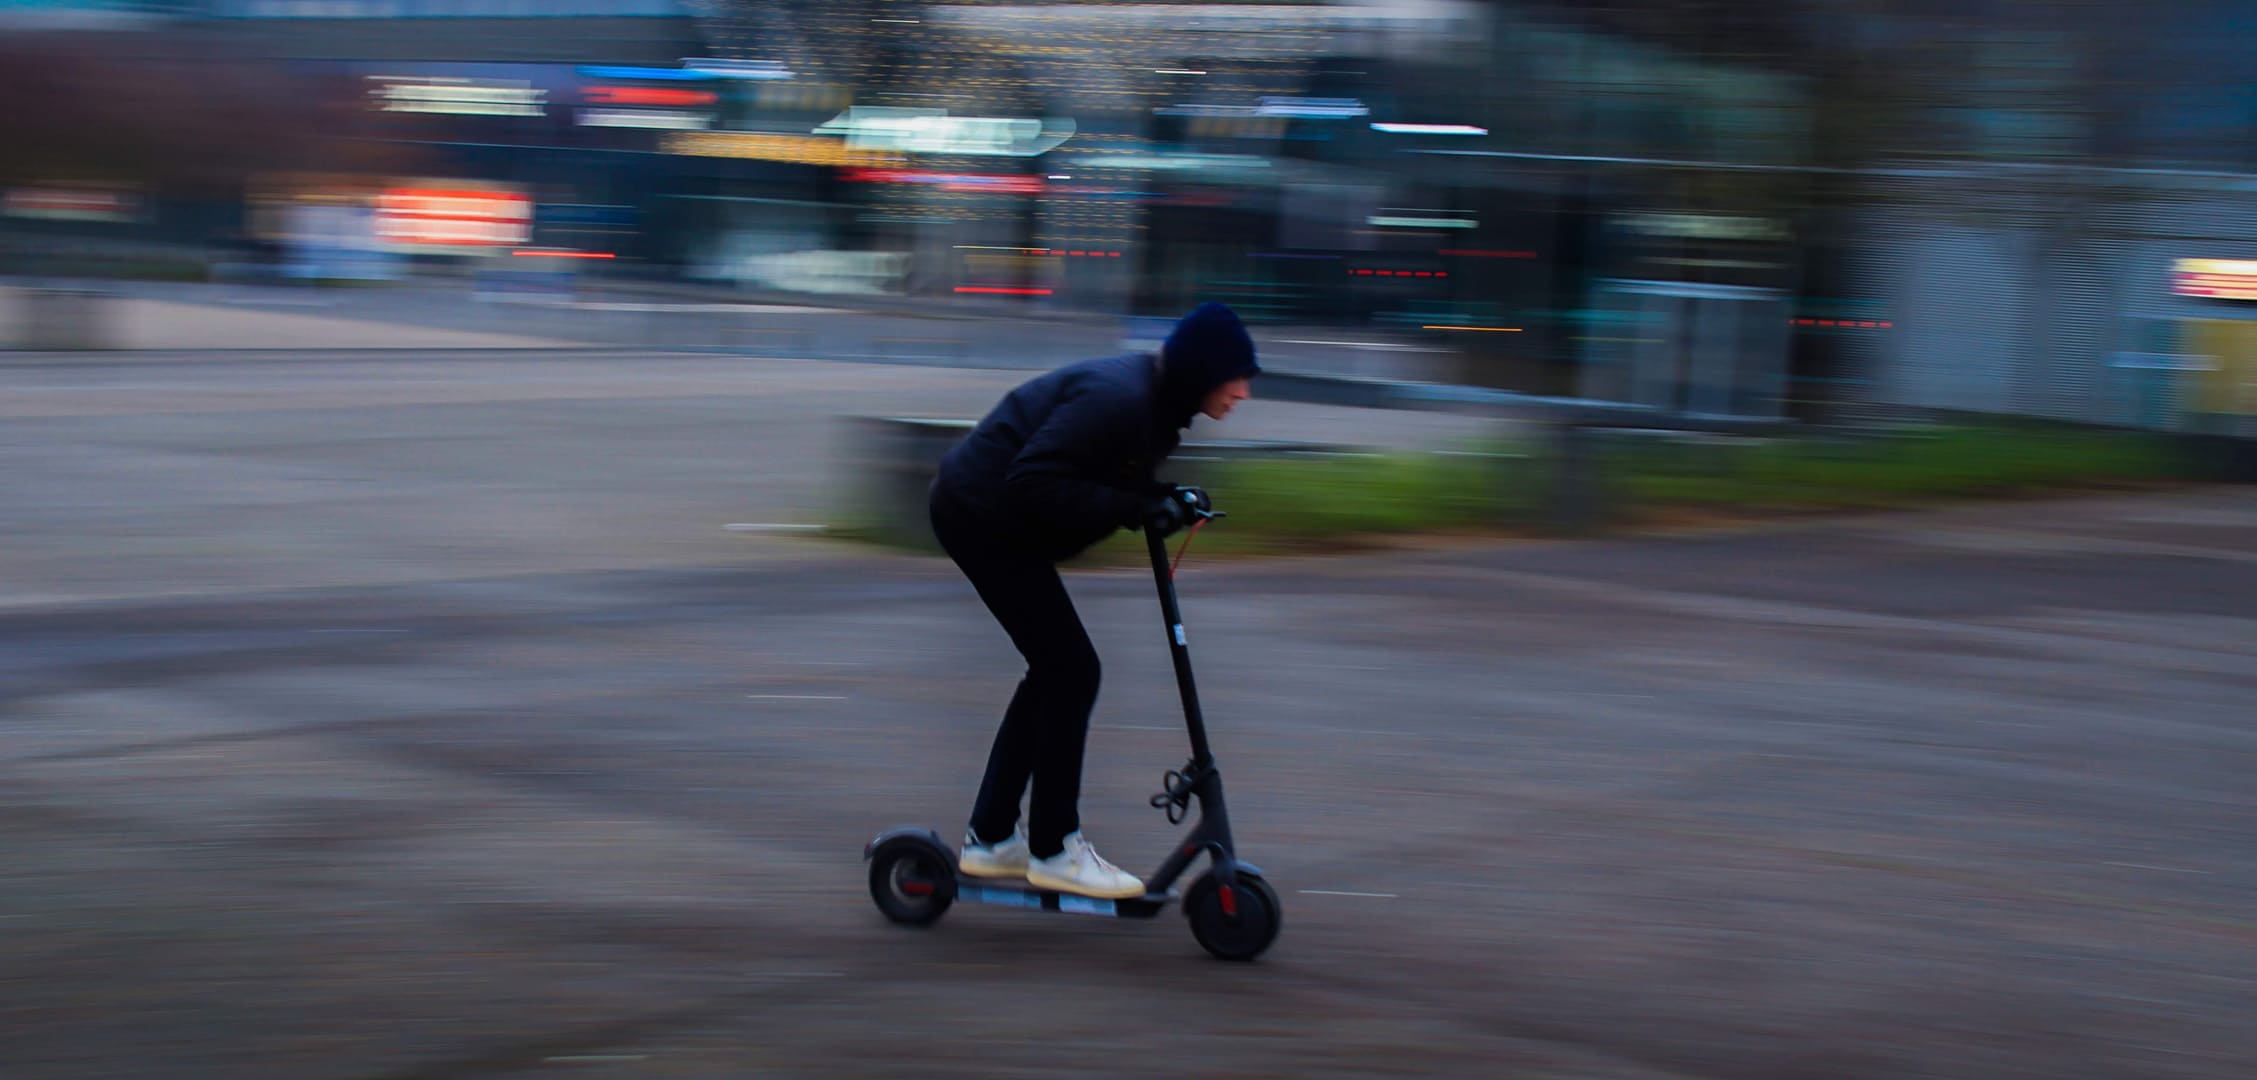 Electric Scooter Rider Going At High Speed Urban Photo